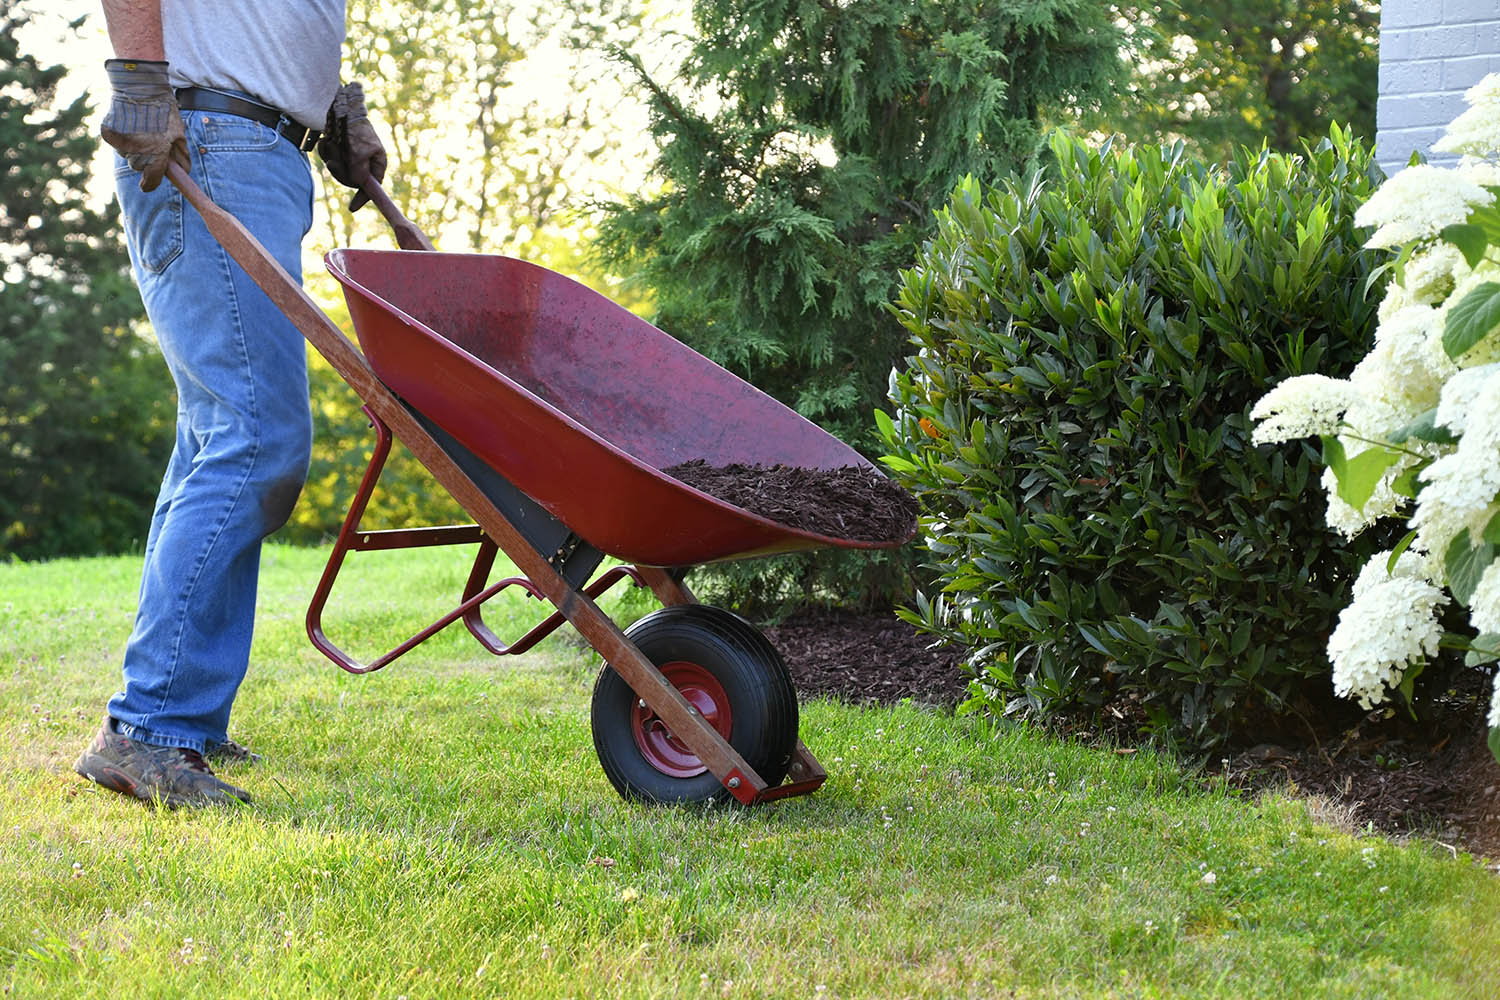 Yard Maintenance Tasks that You're Going to Want a Dumpster For